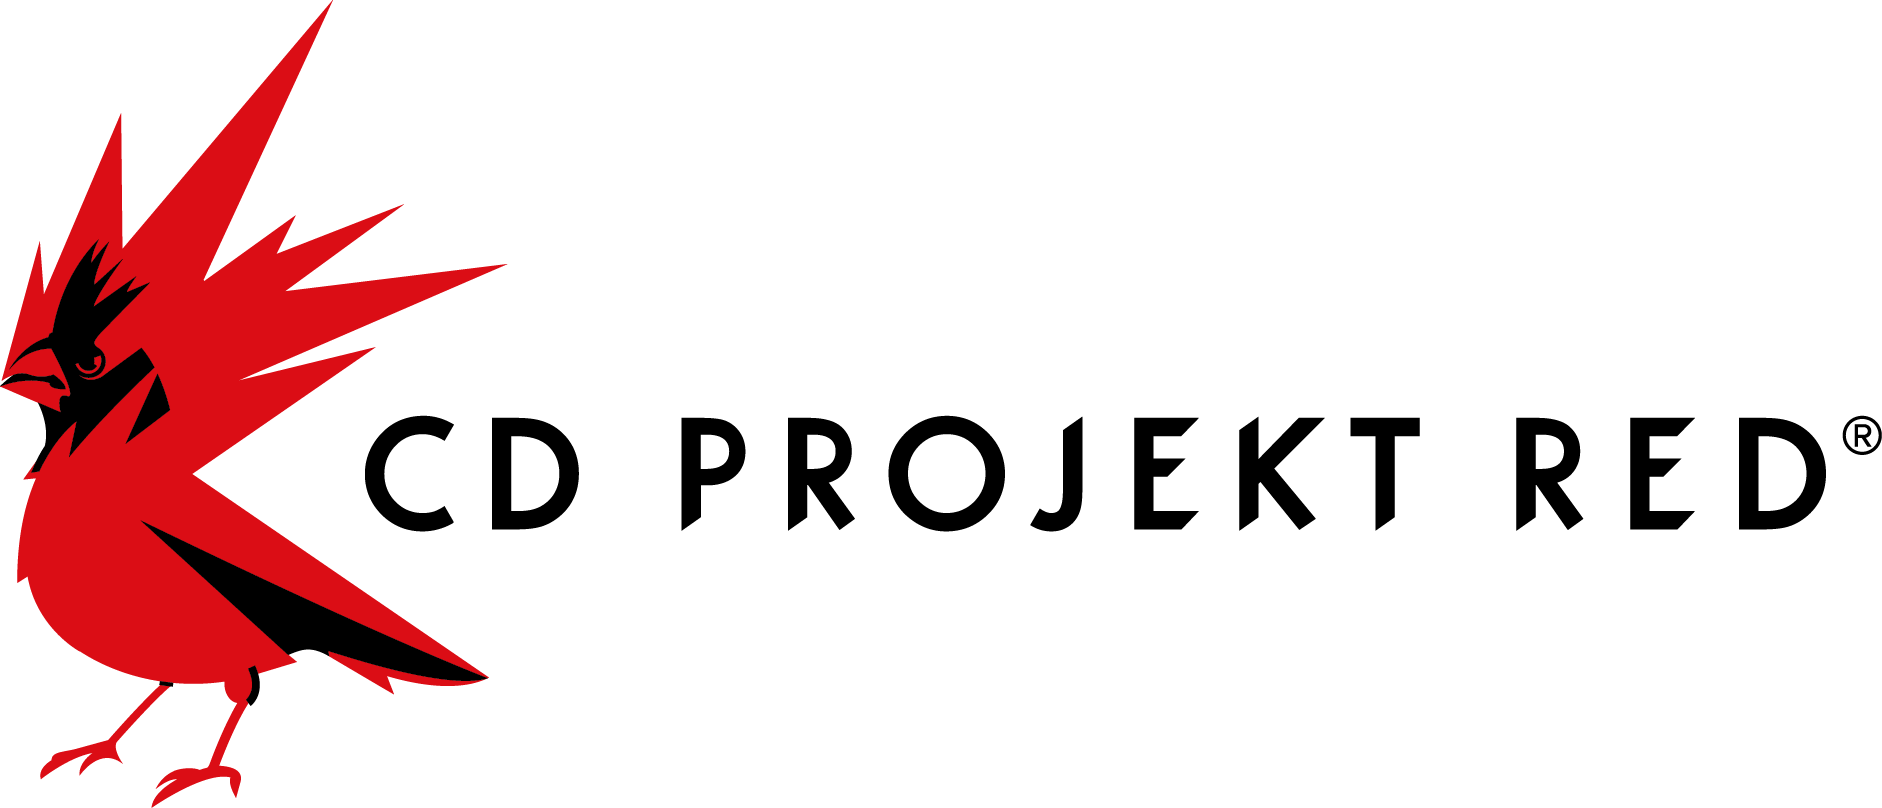 Red Bird Red a Logo - CD Projekt RED logo is now a REDbird to better reflect company's